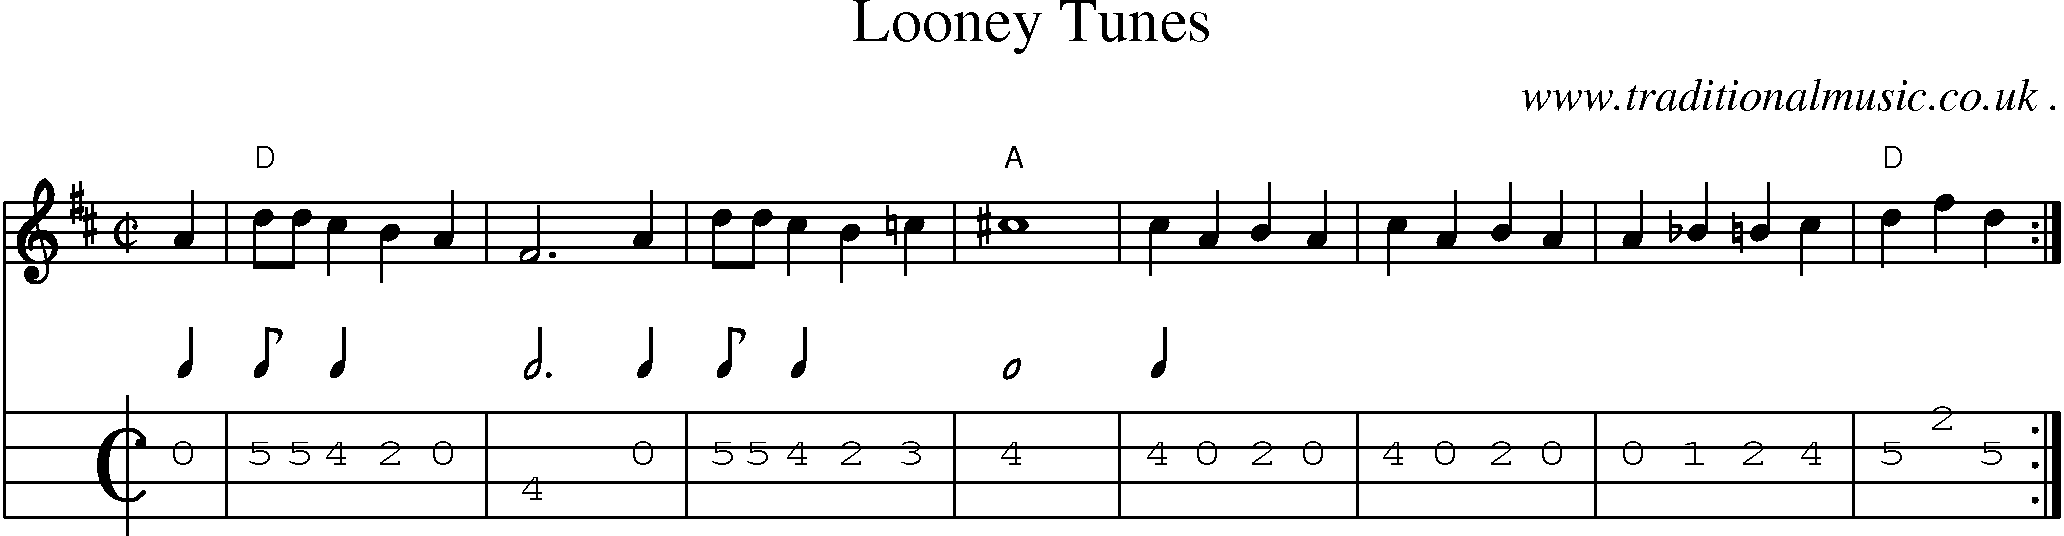 Music Score and Guitar Tabs for Looney Tunes